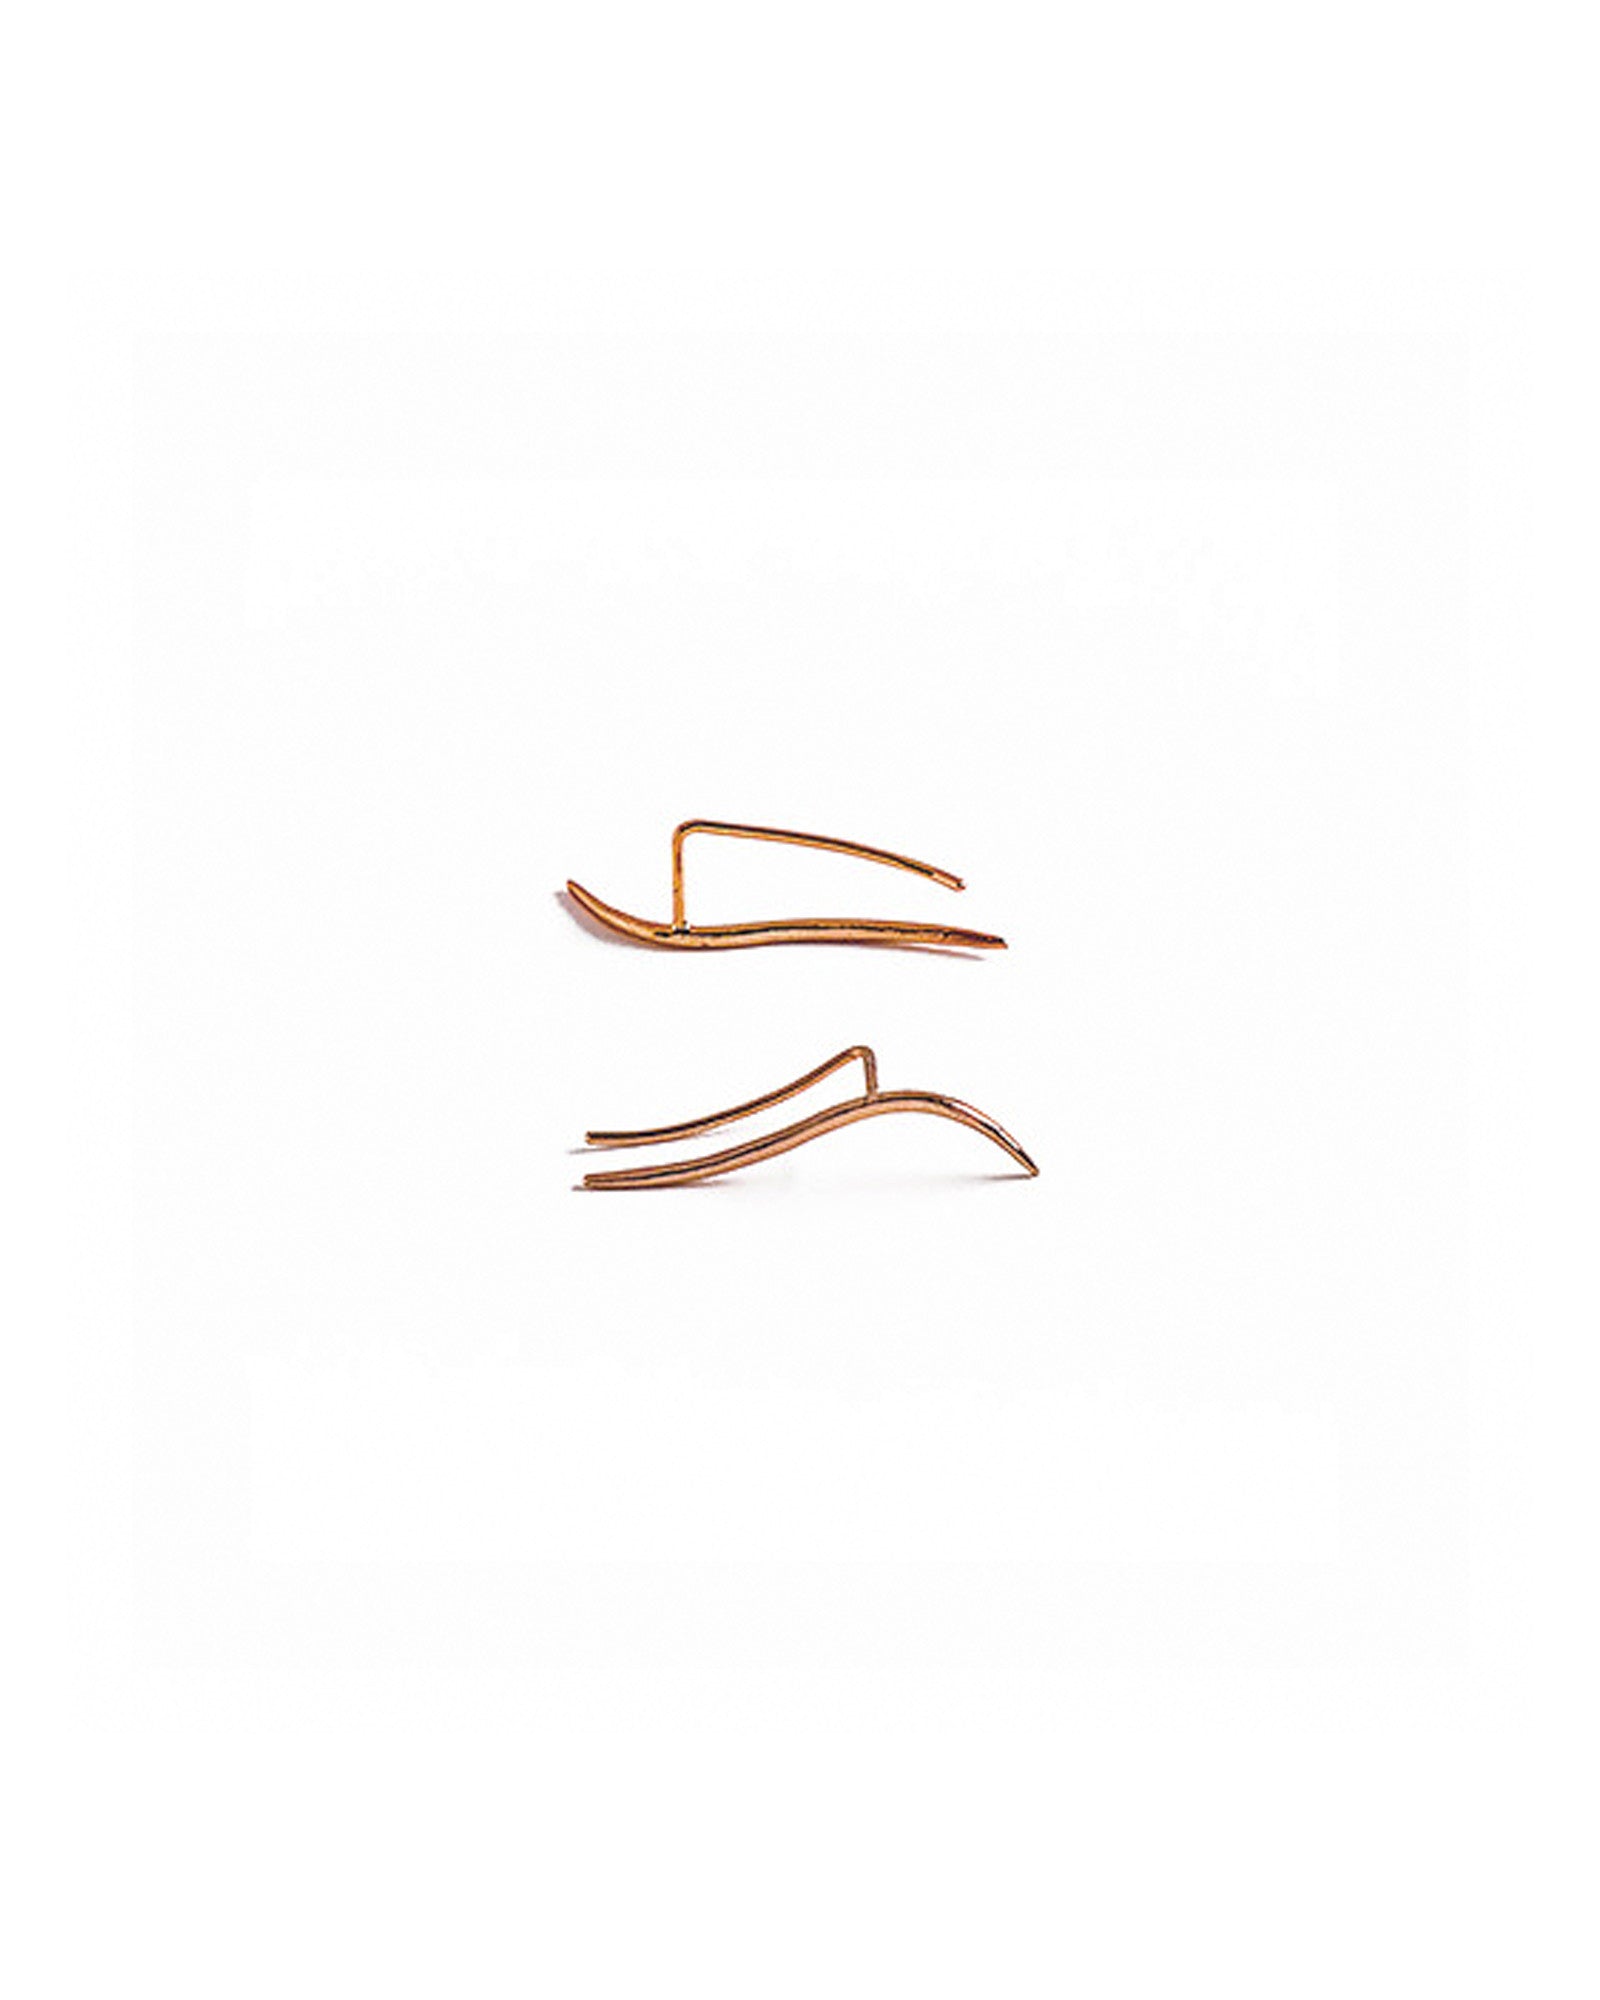 Knobbly Studio Calligraphic Ear Pin Rose Gold